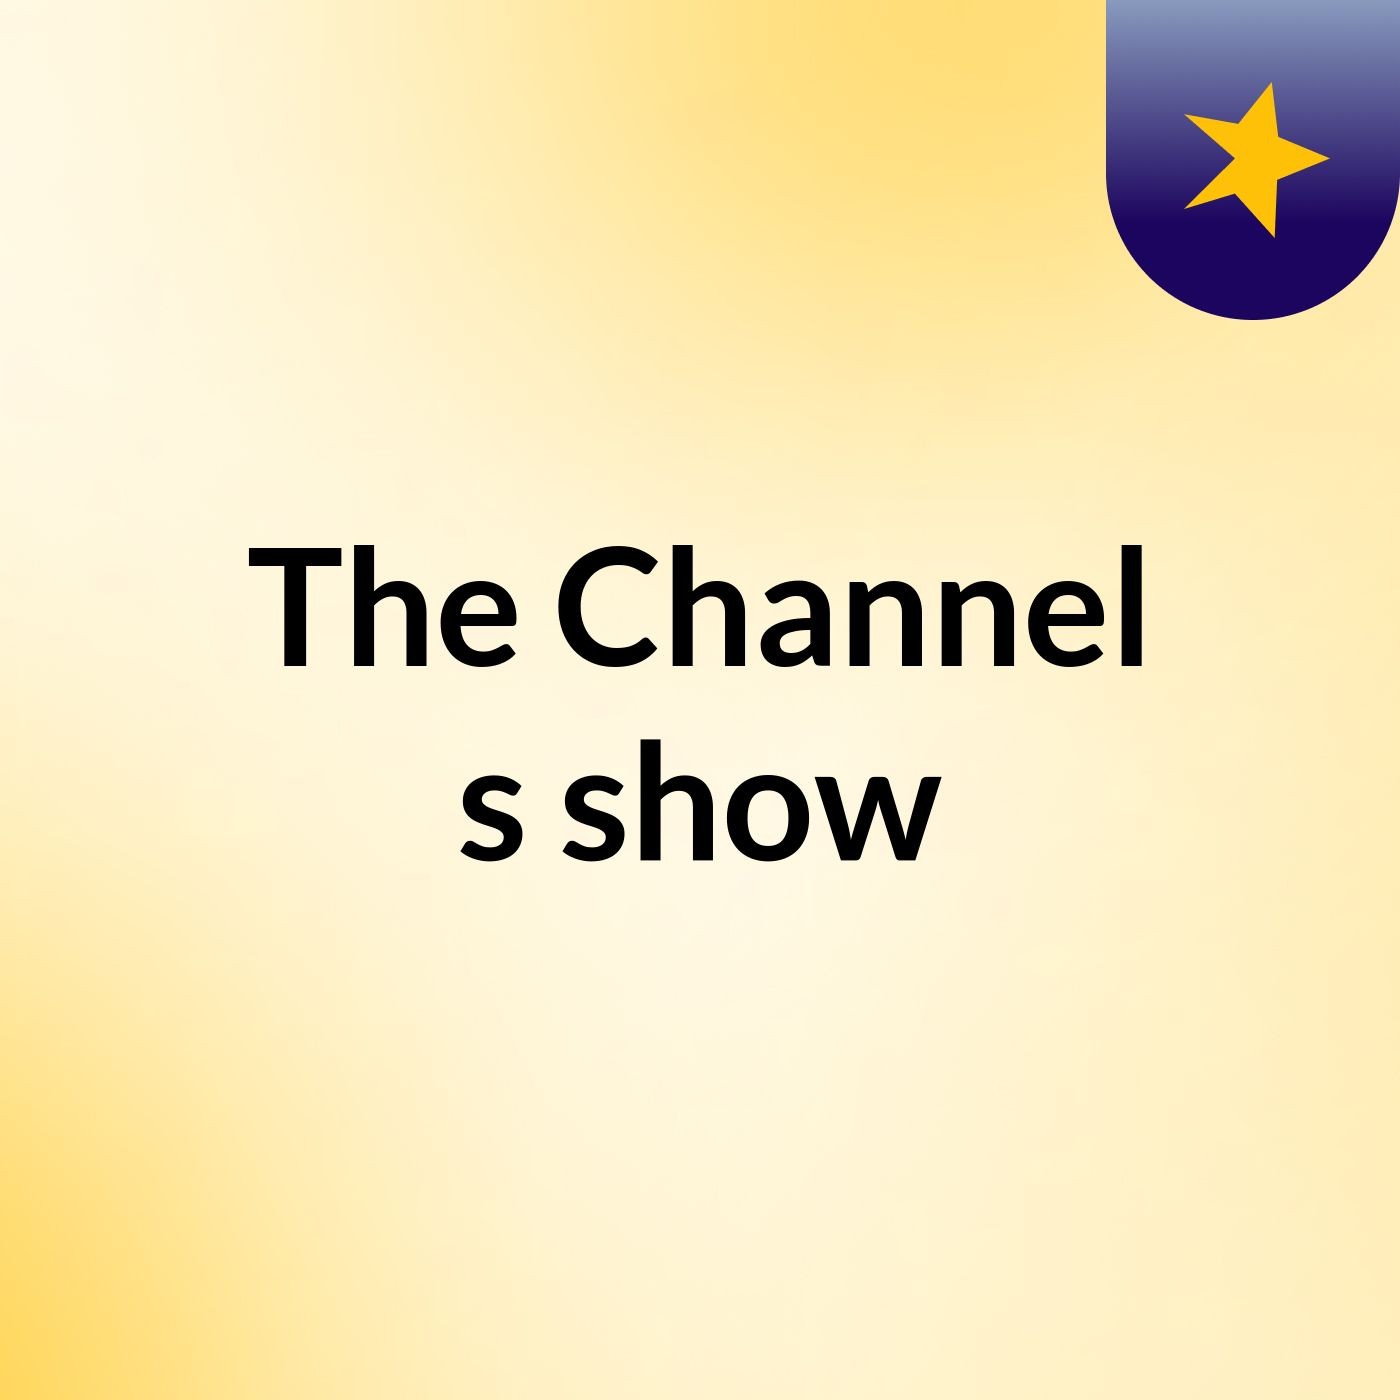 Episode 11 - The Channel's show